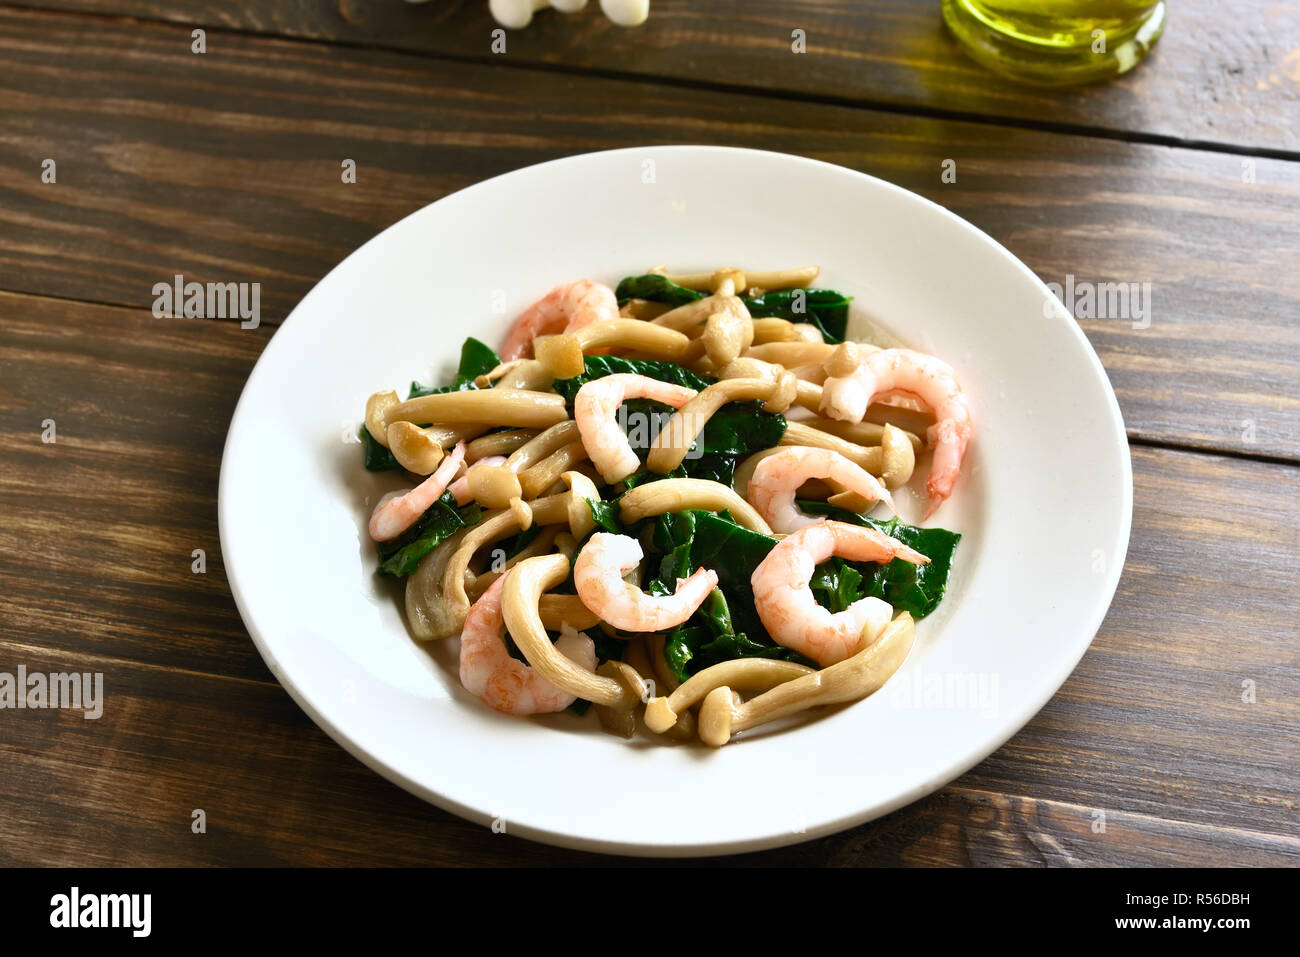 White beech mushrooms with leaves of spinach and shrimps on wooden table Stock Photo